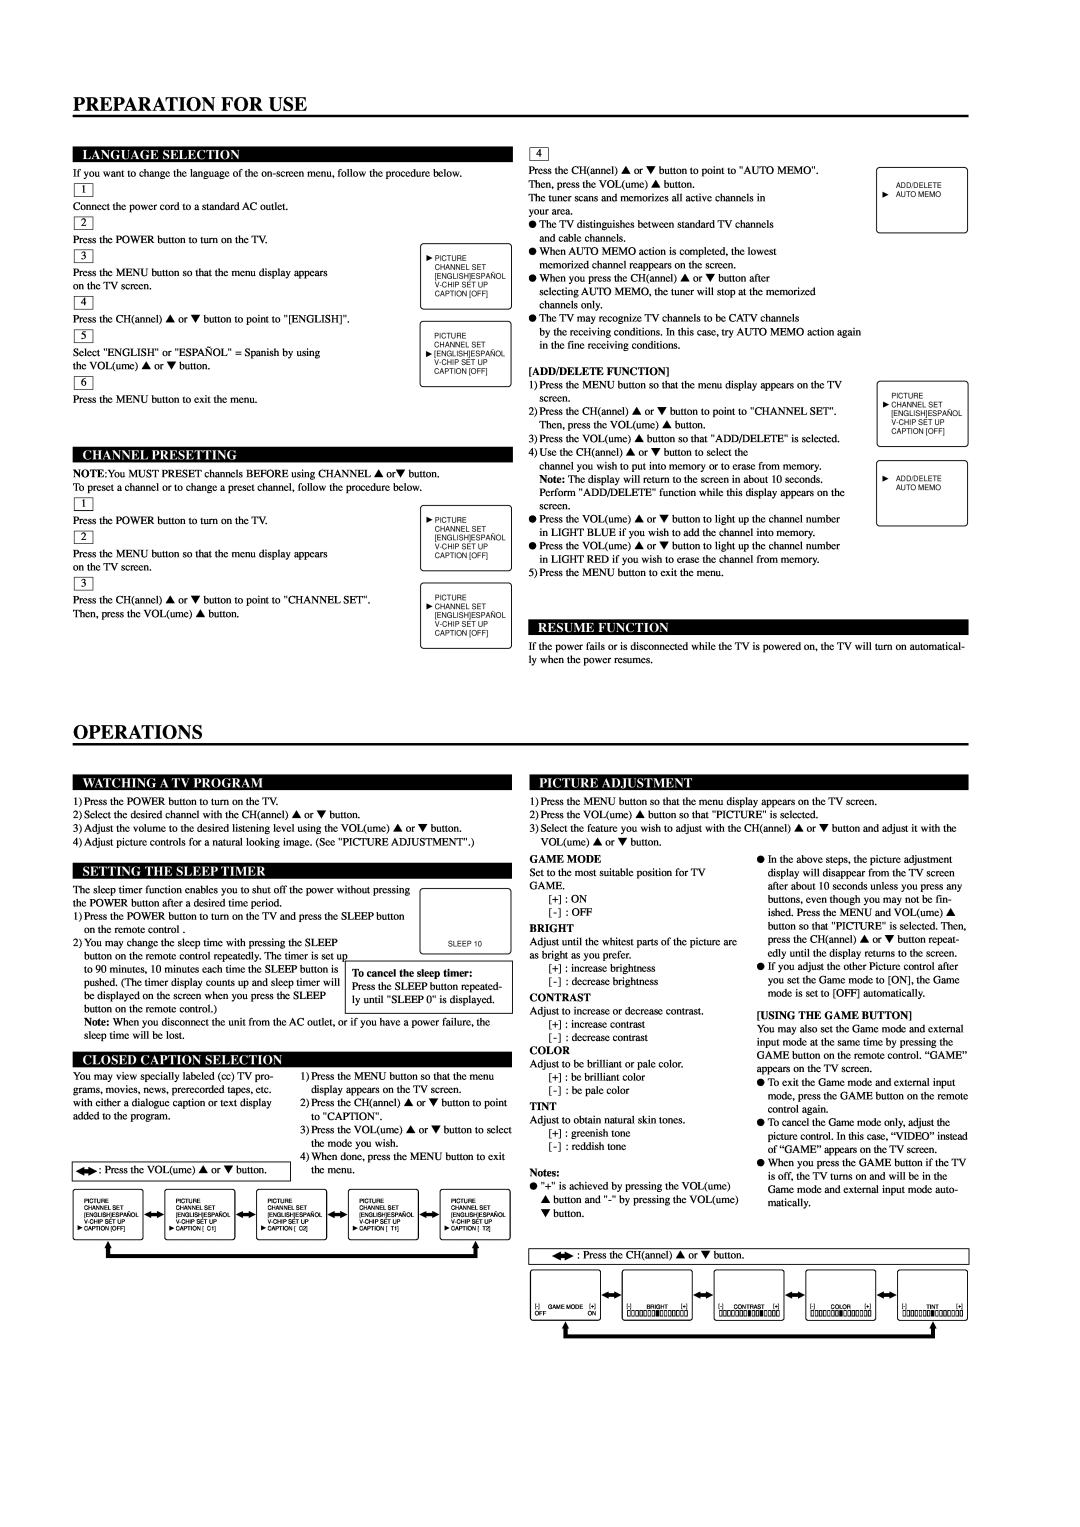 Sylvania 6413TD, 6419TD Preparation For Use, Operations, Language Selection, Channel Presetting, Resume Function, Bright 